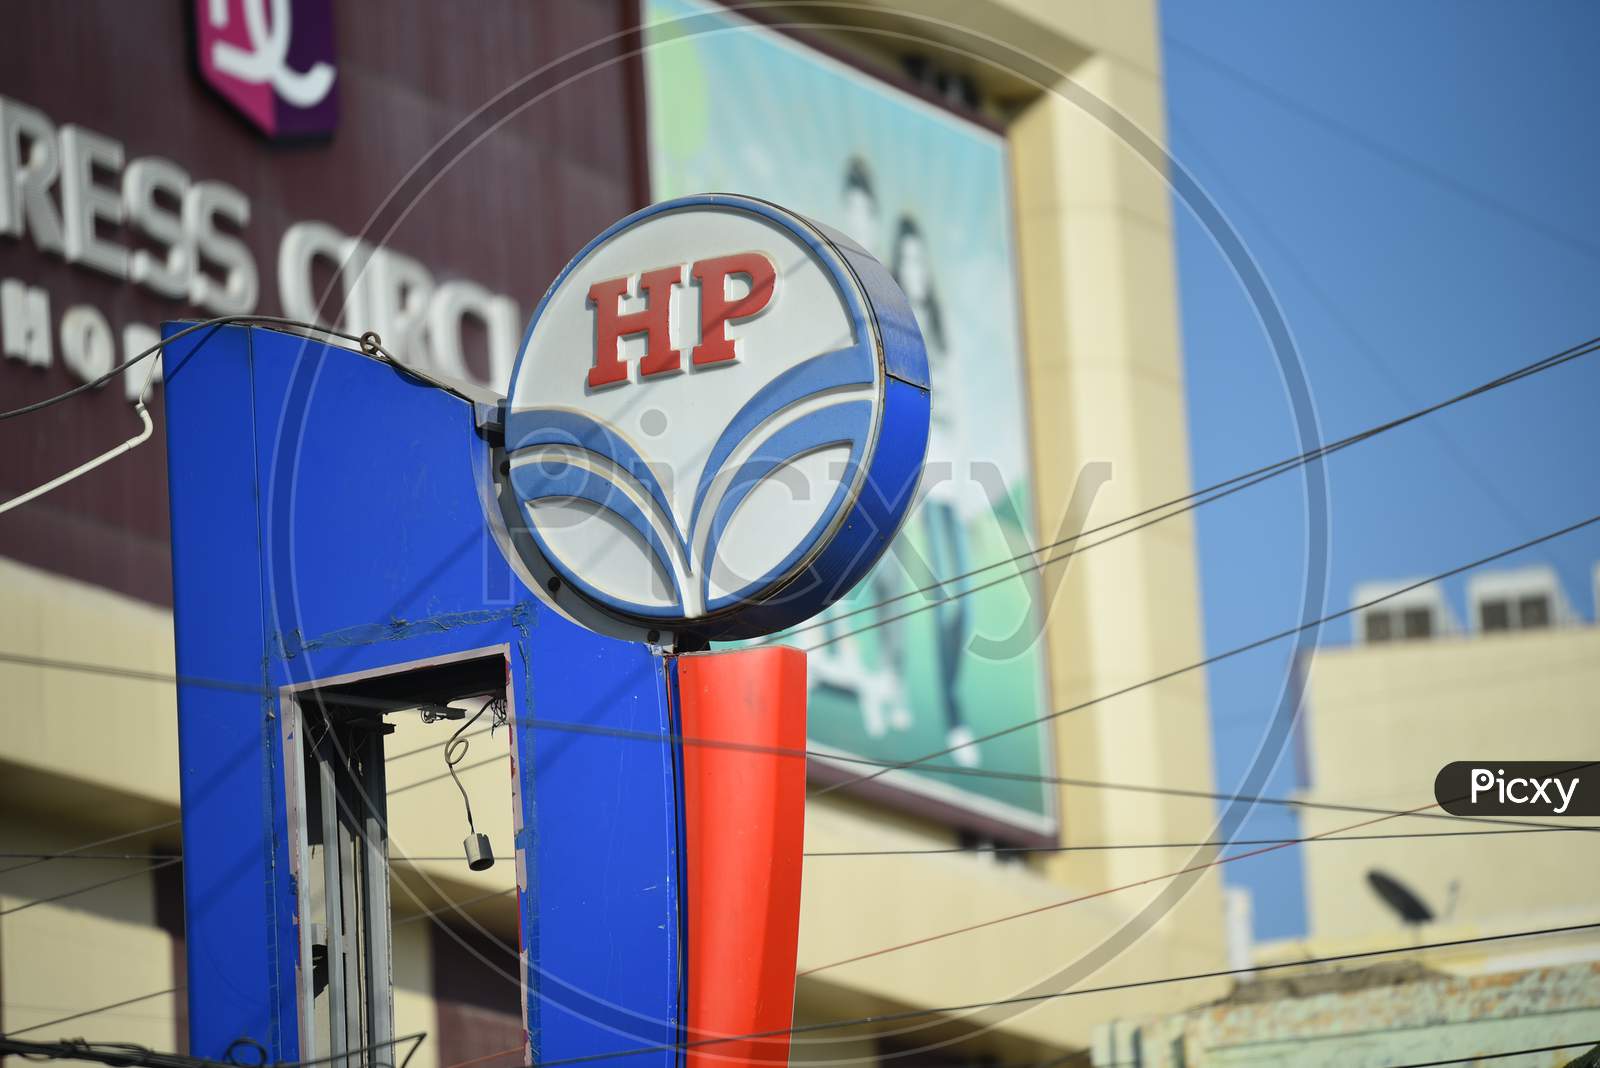 HP Hindustan Petroleum Fuel Station With Name Board